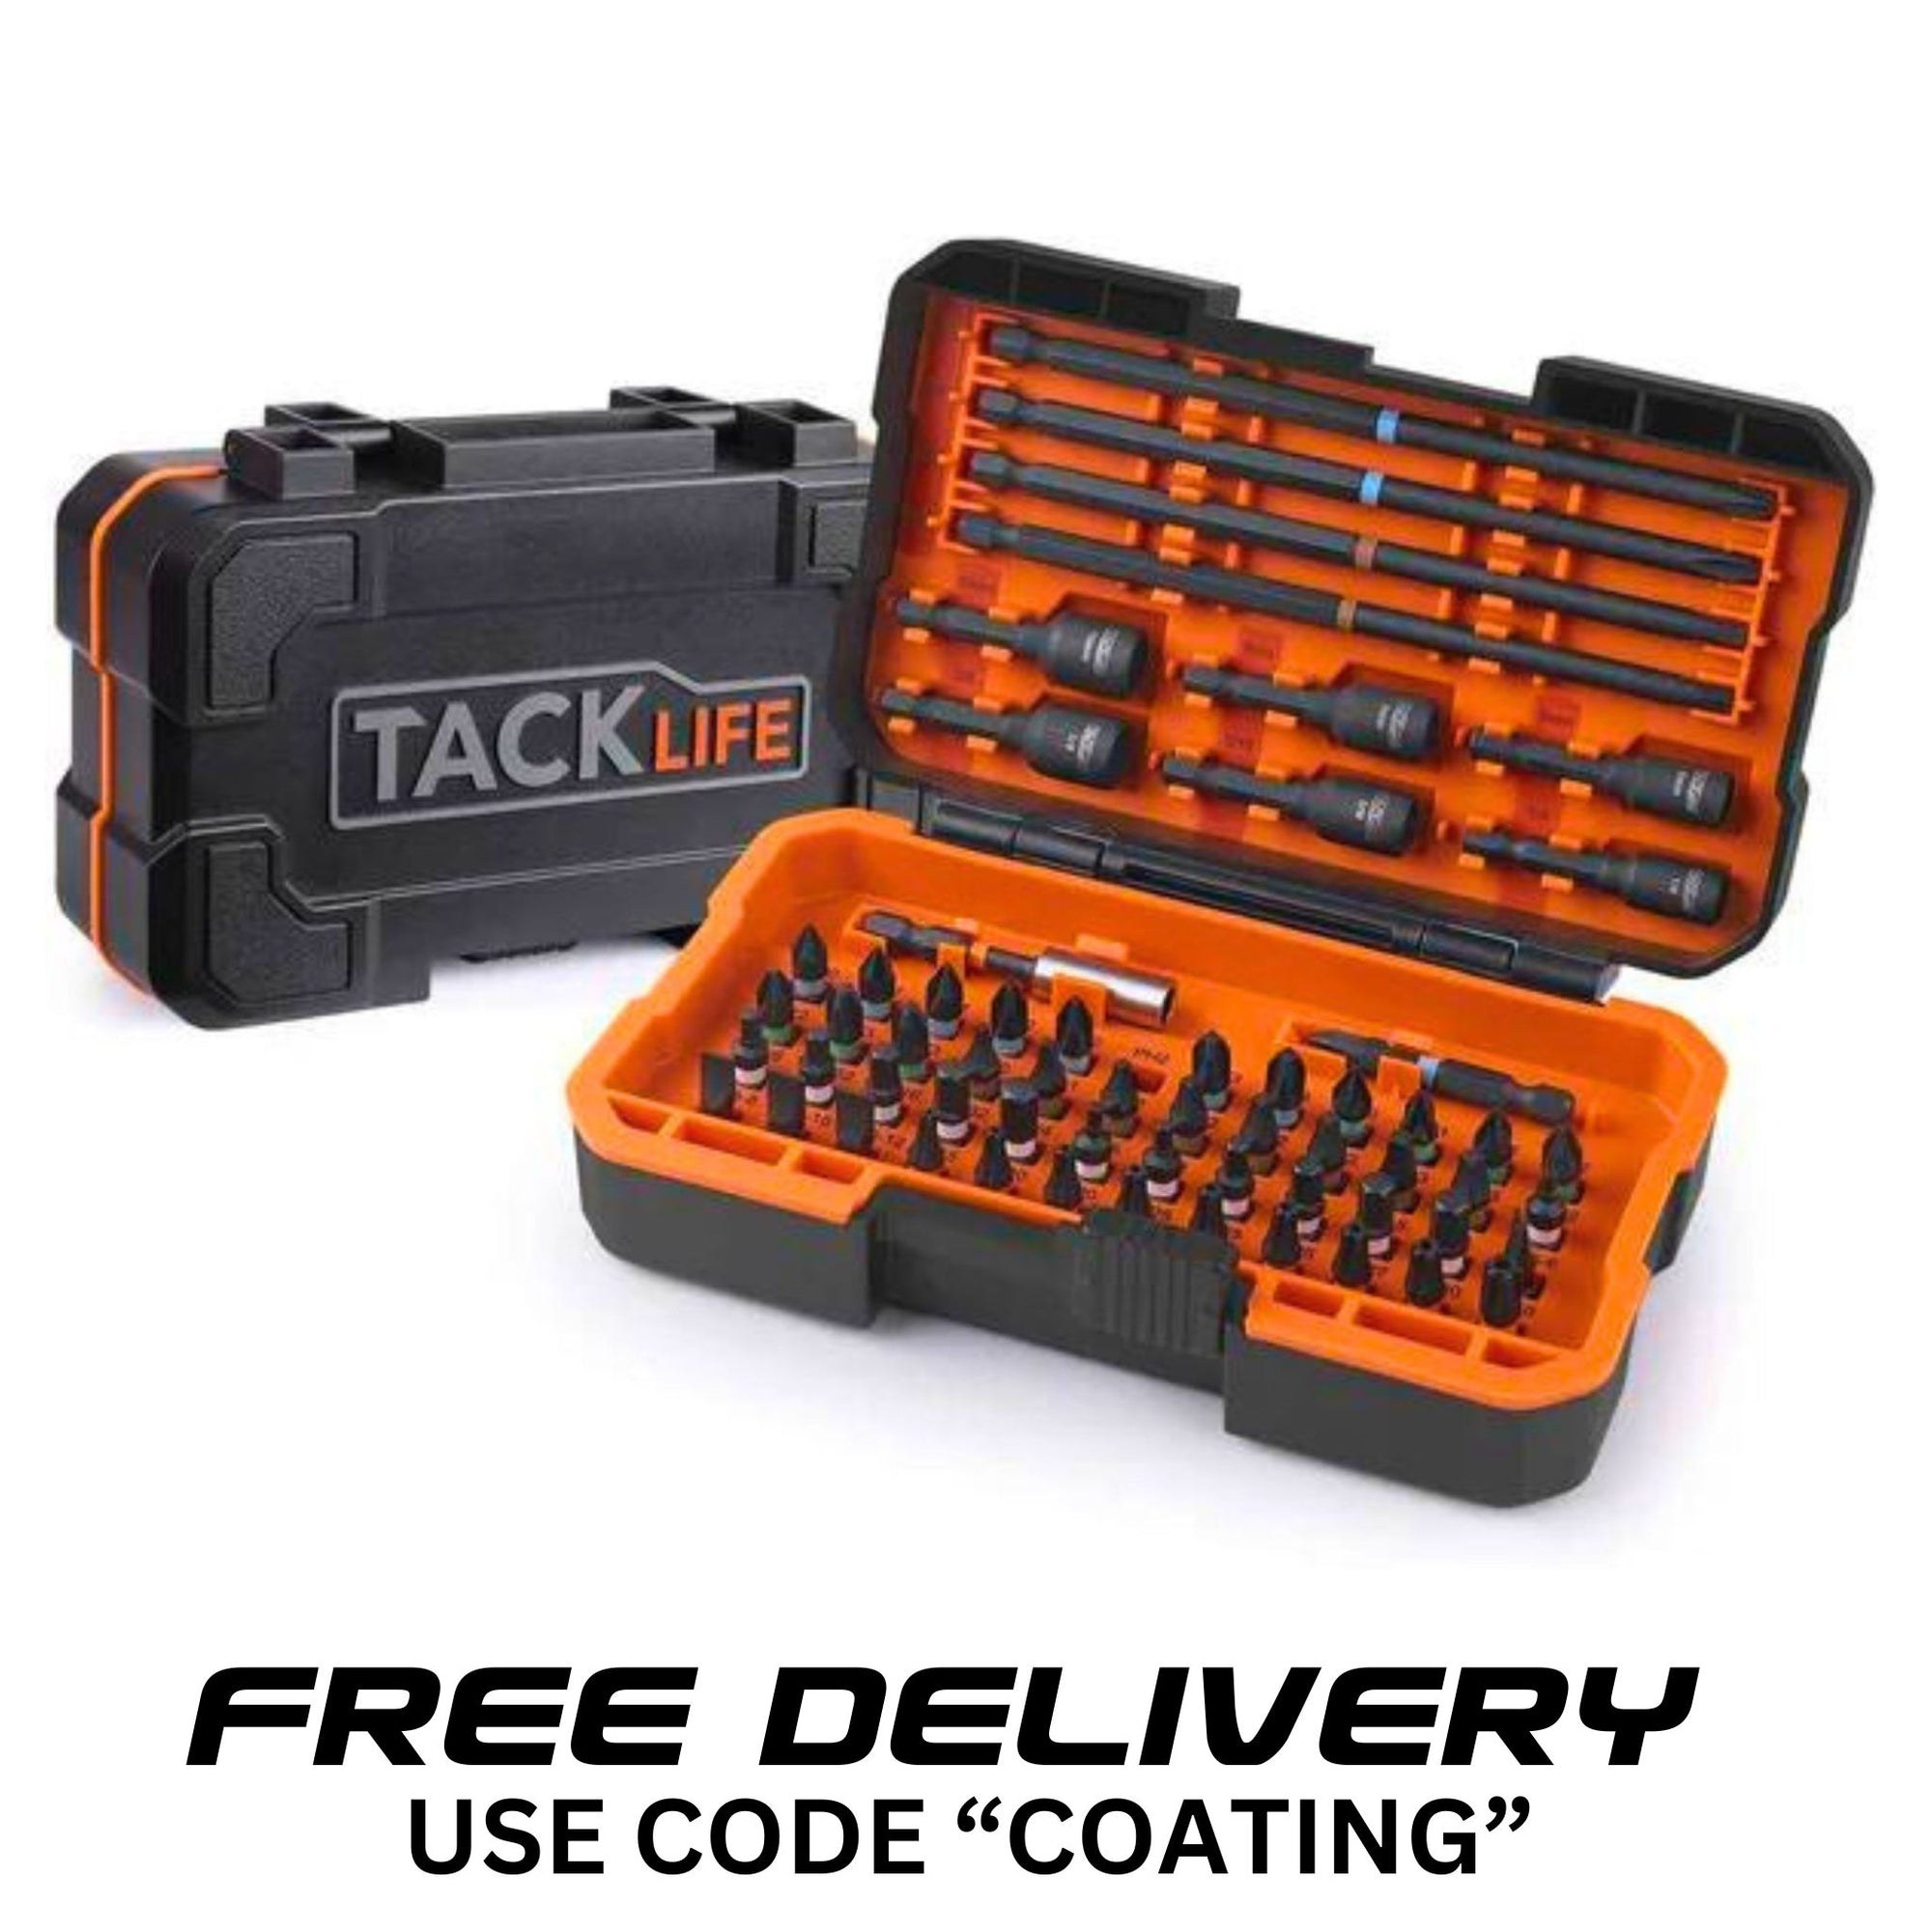 Tacklife 60 Piece Bit Set - South East Clearance Centre